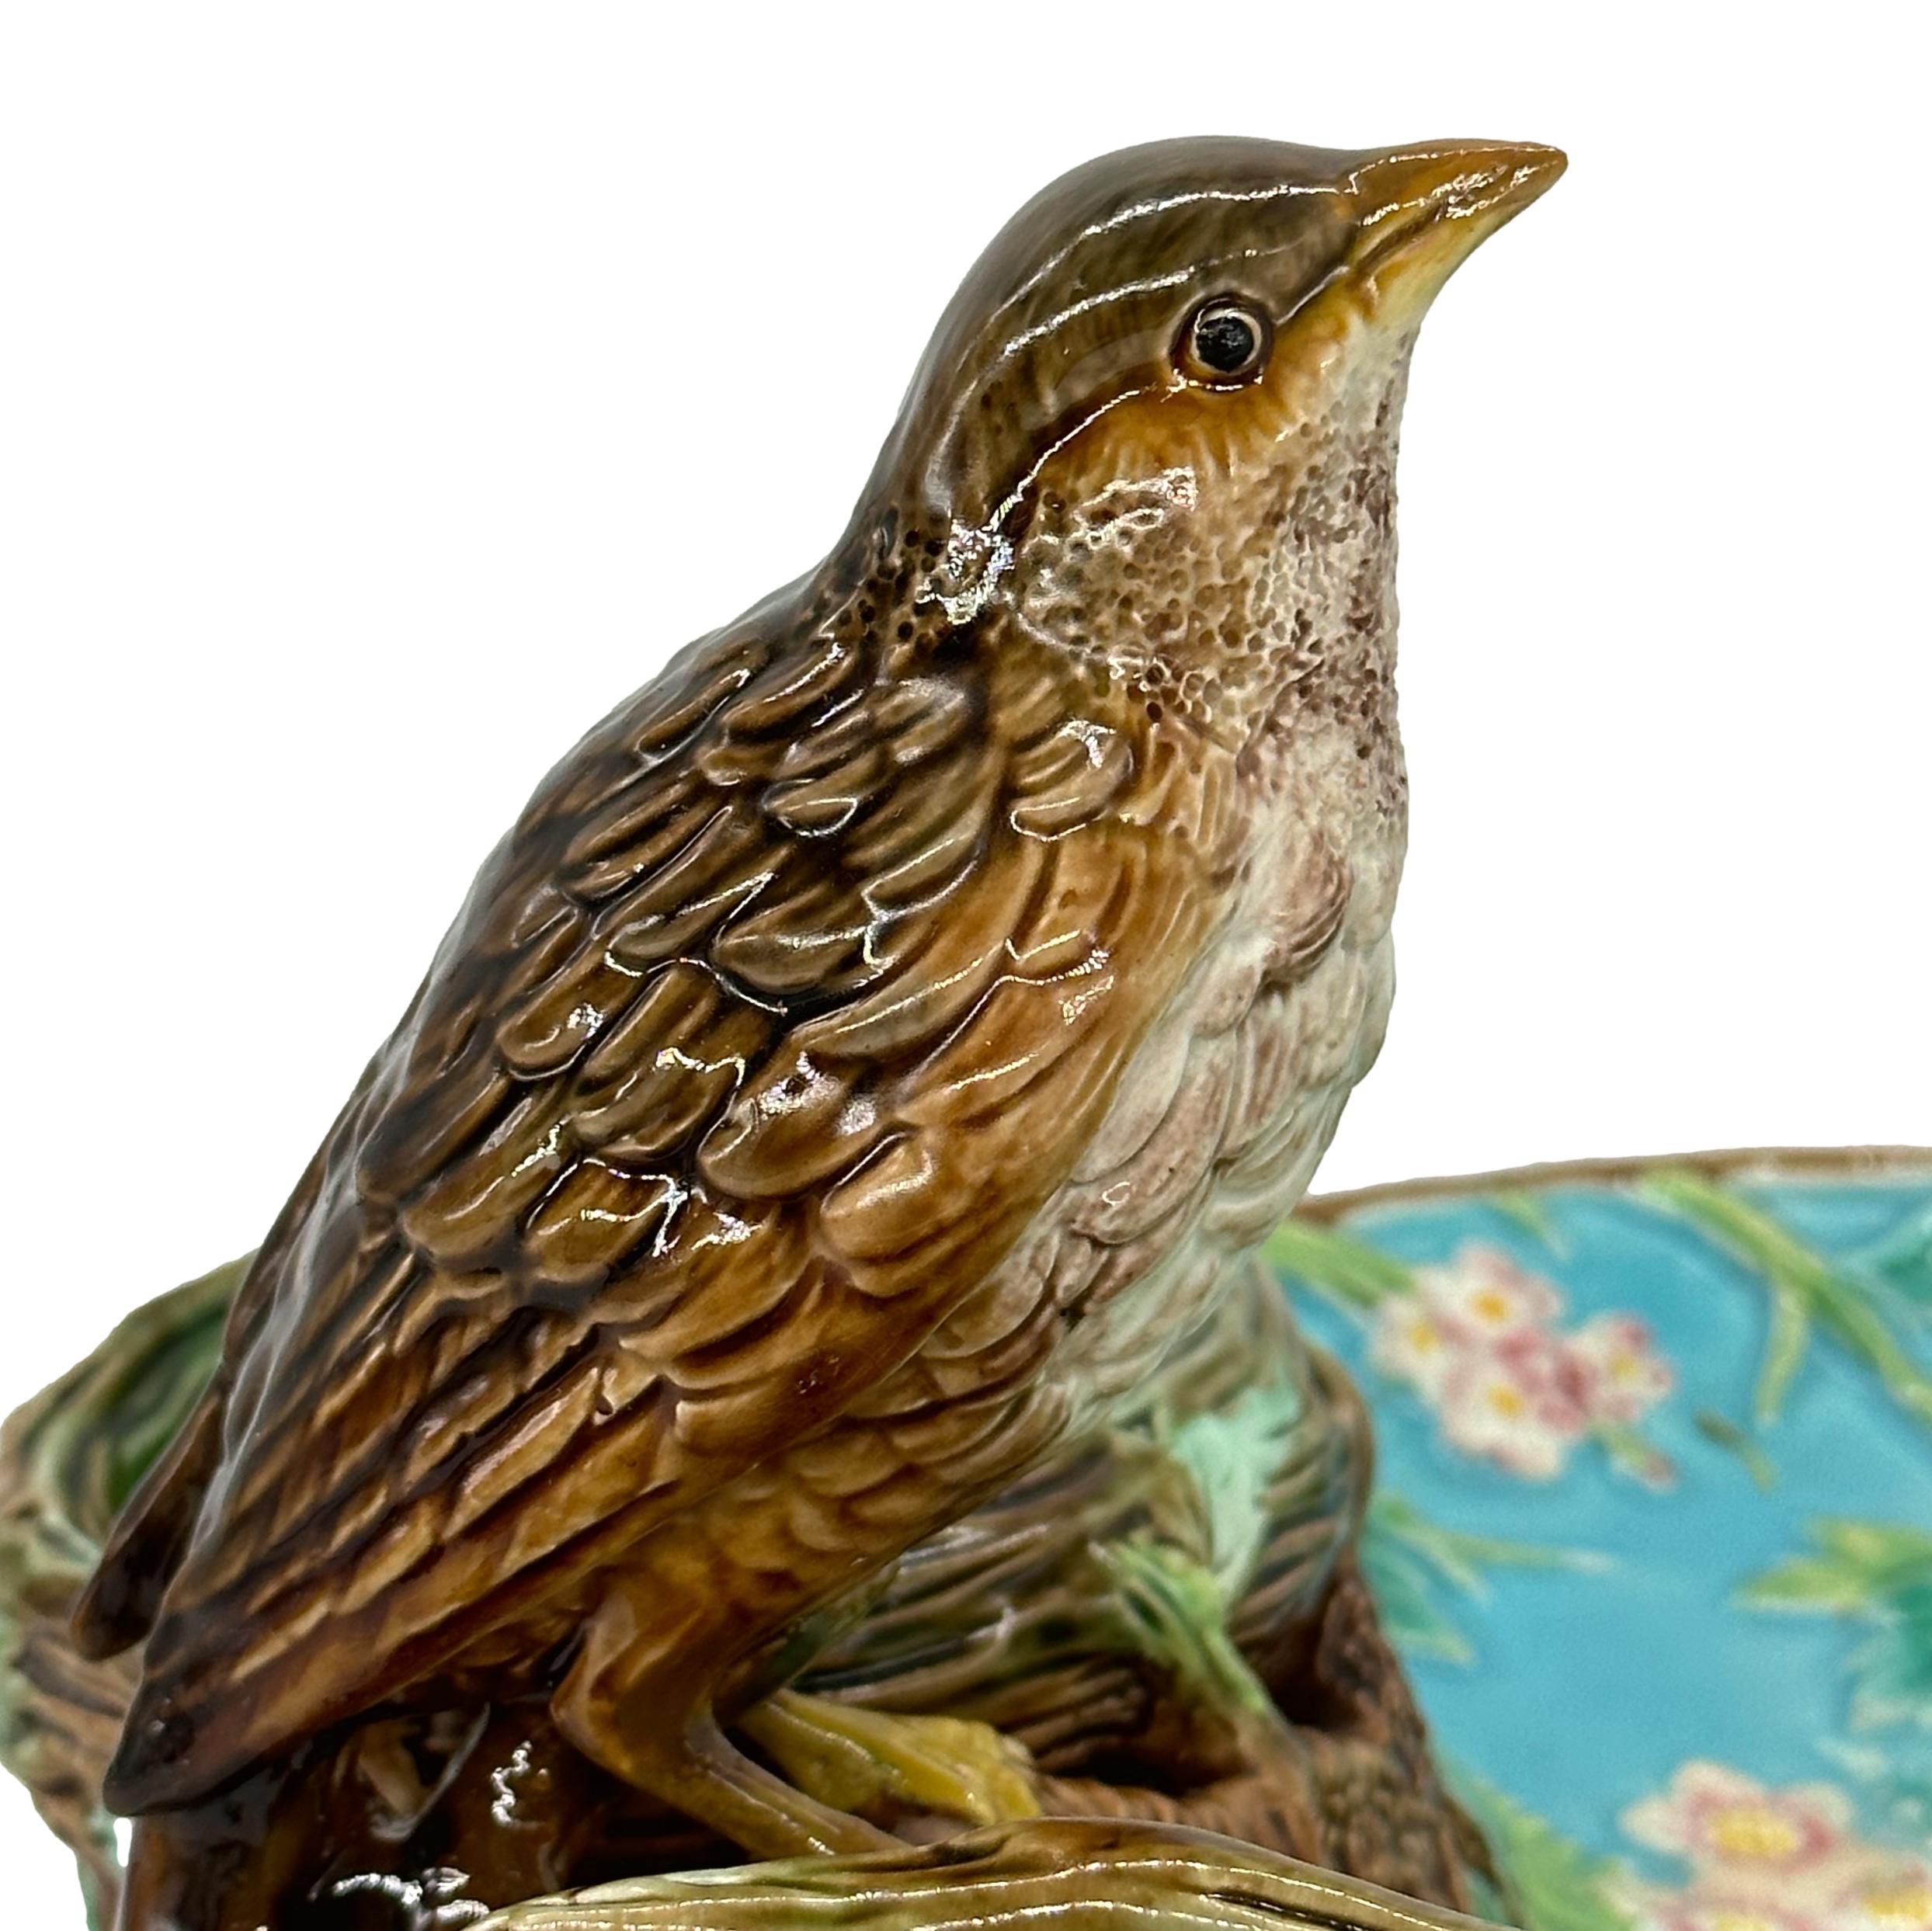 George Jones Majolica Strawberry Server Mounted by a Bird, English, circa 1870 For Sale 7